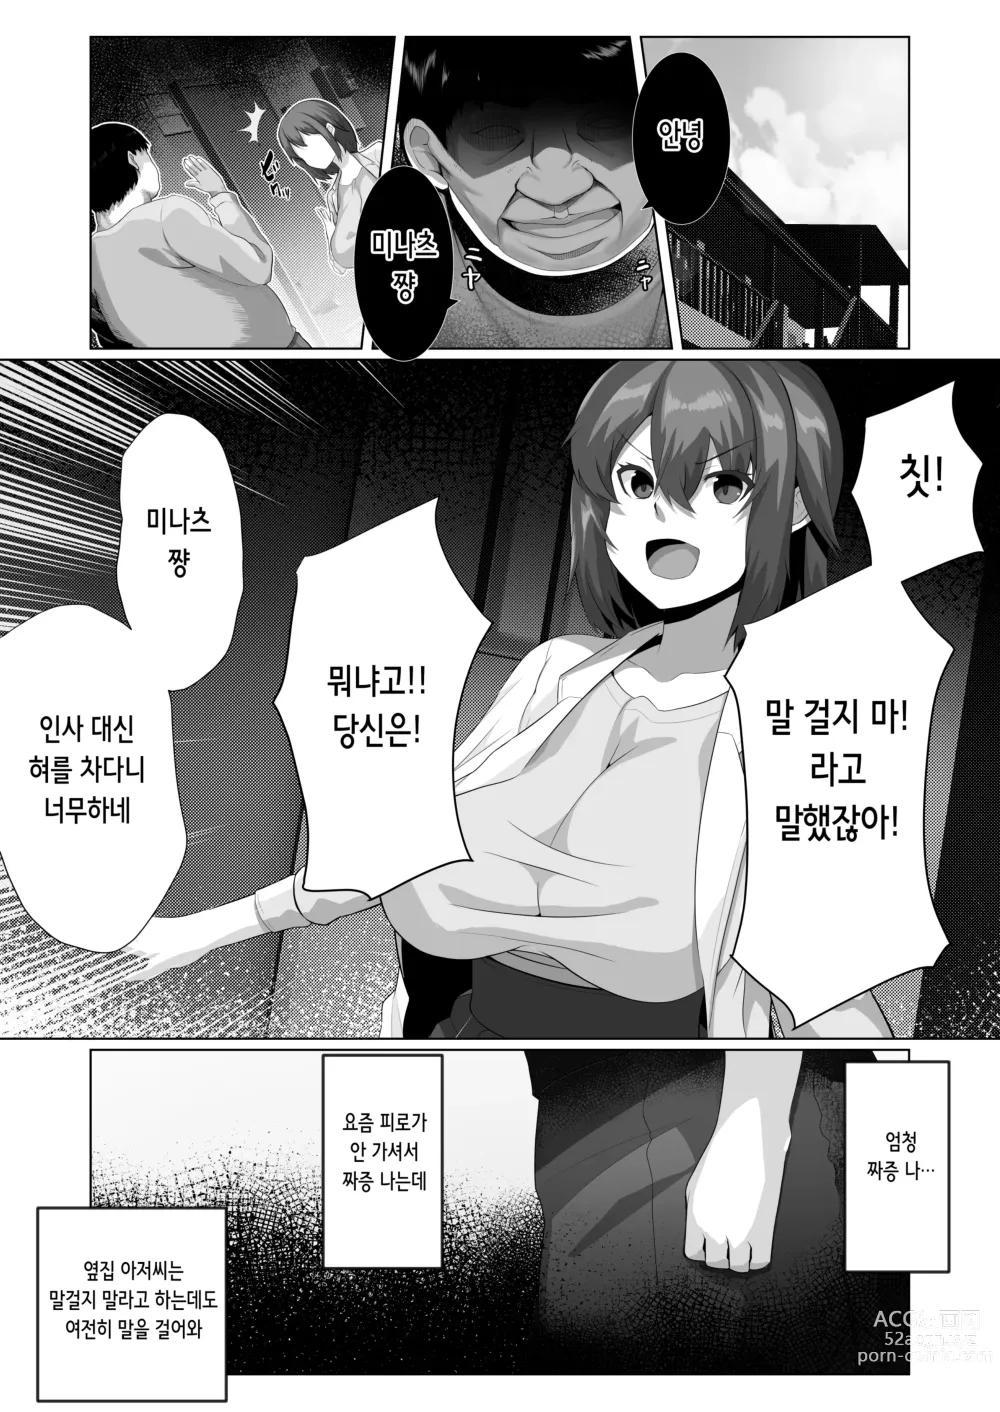 Page 3 of doujinshi 최면 이웃 JD 2